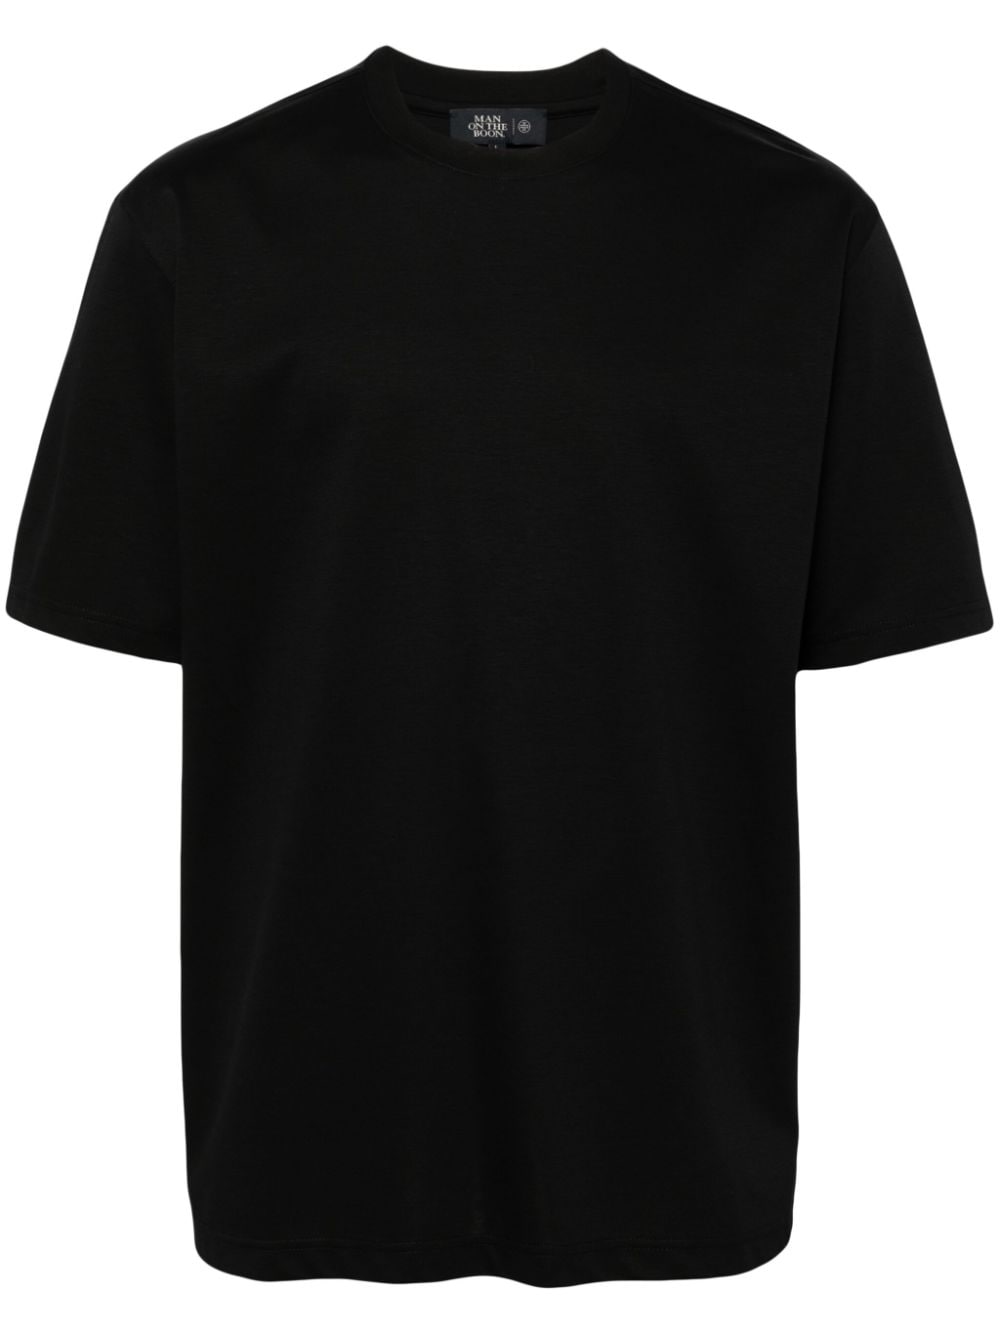 Shop Man On The Boon. Glossy Crew-neck Cotton T-shirt In Black